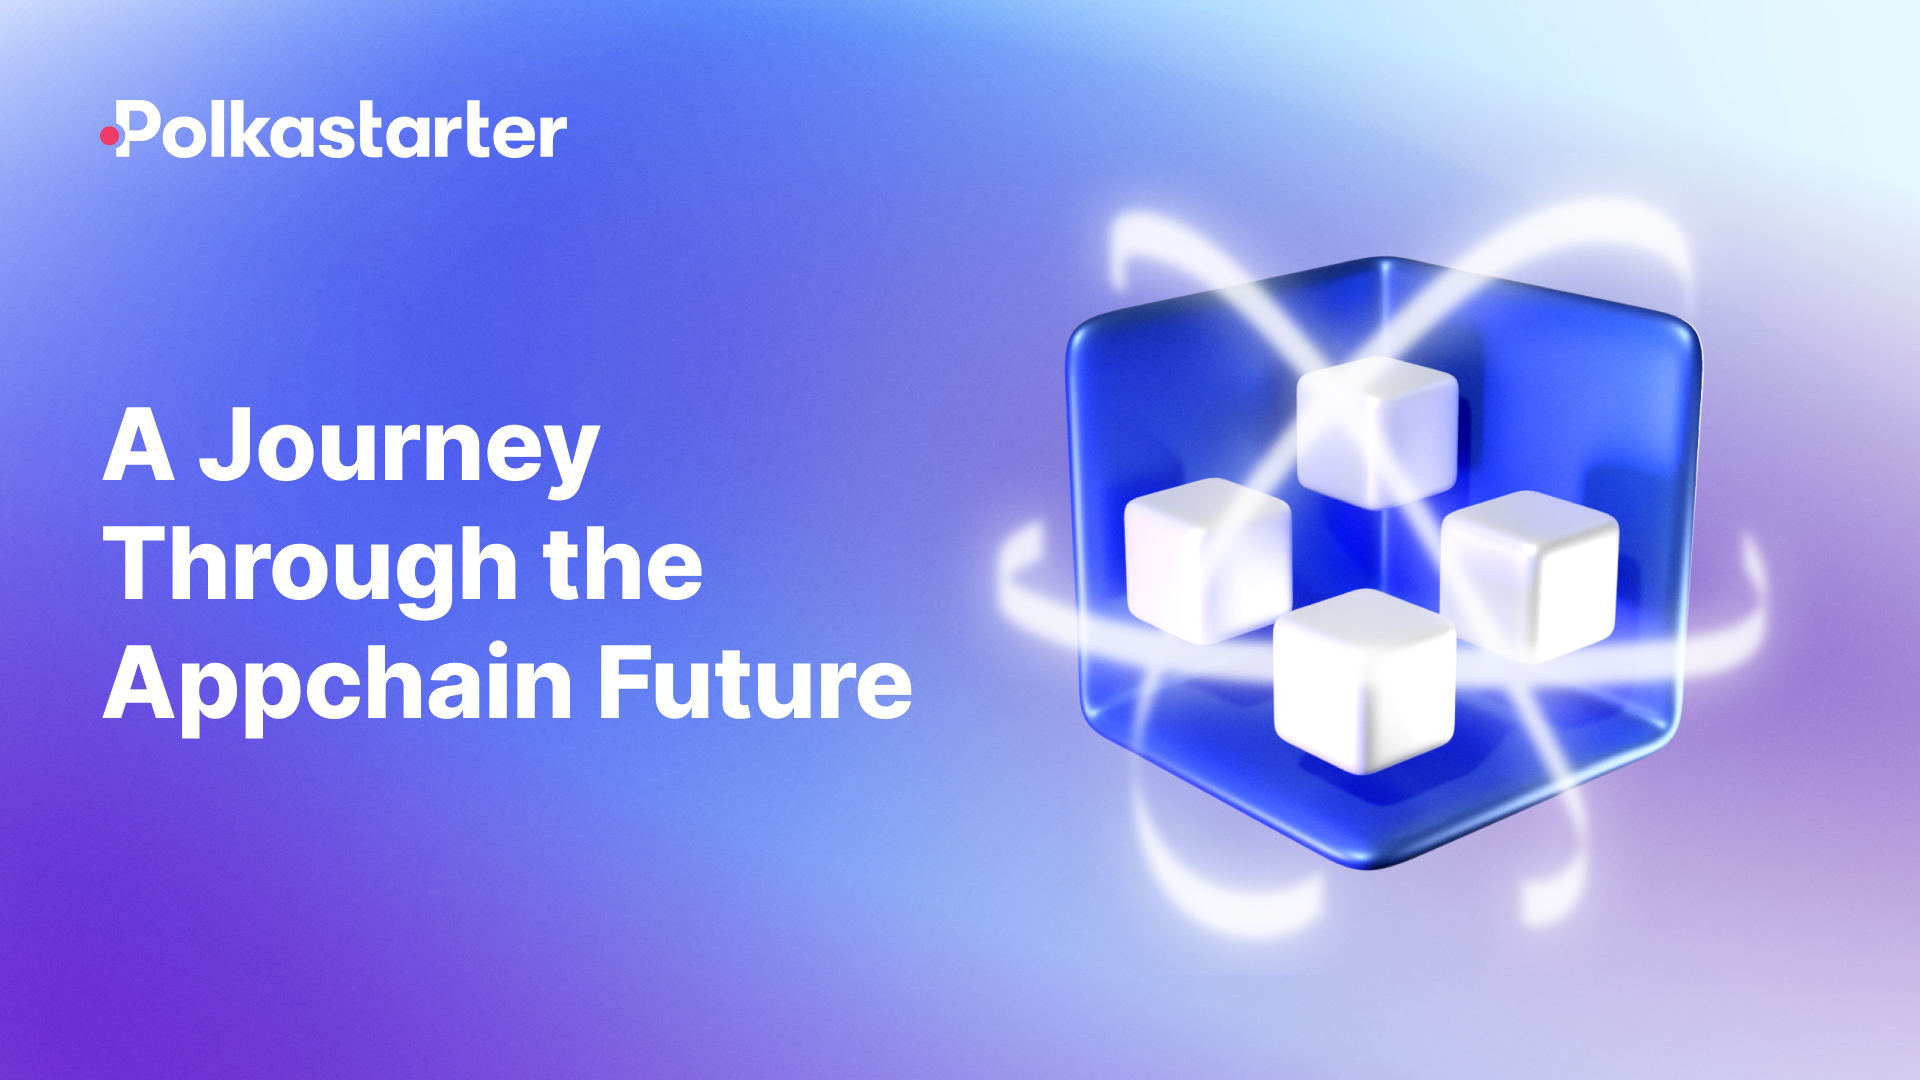 A Journey Through the Appchain Future